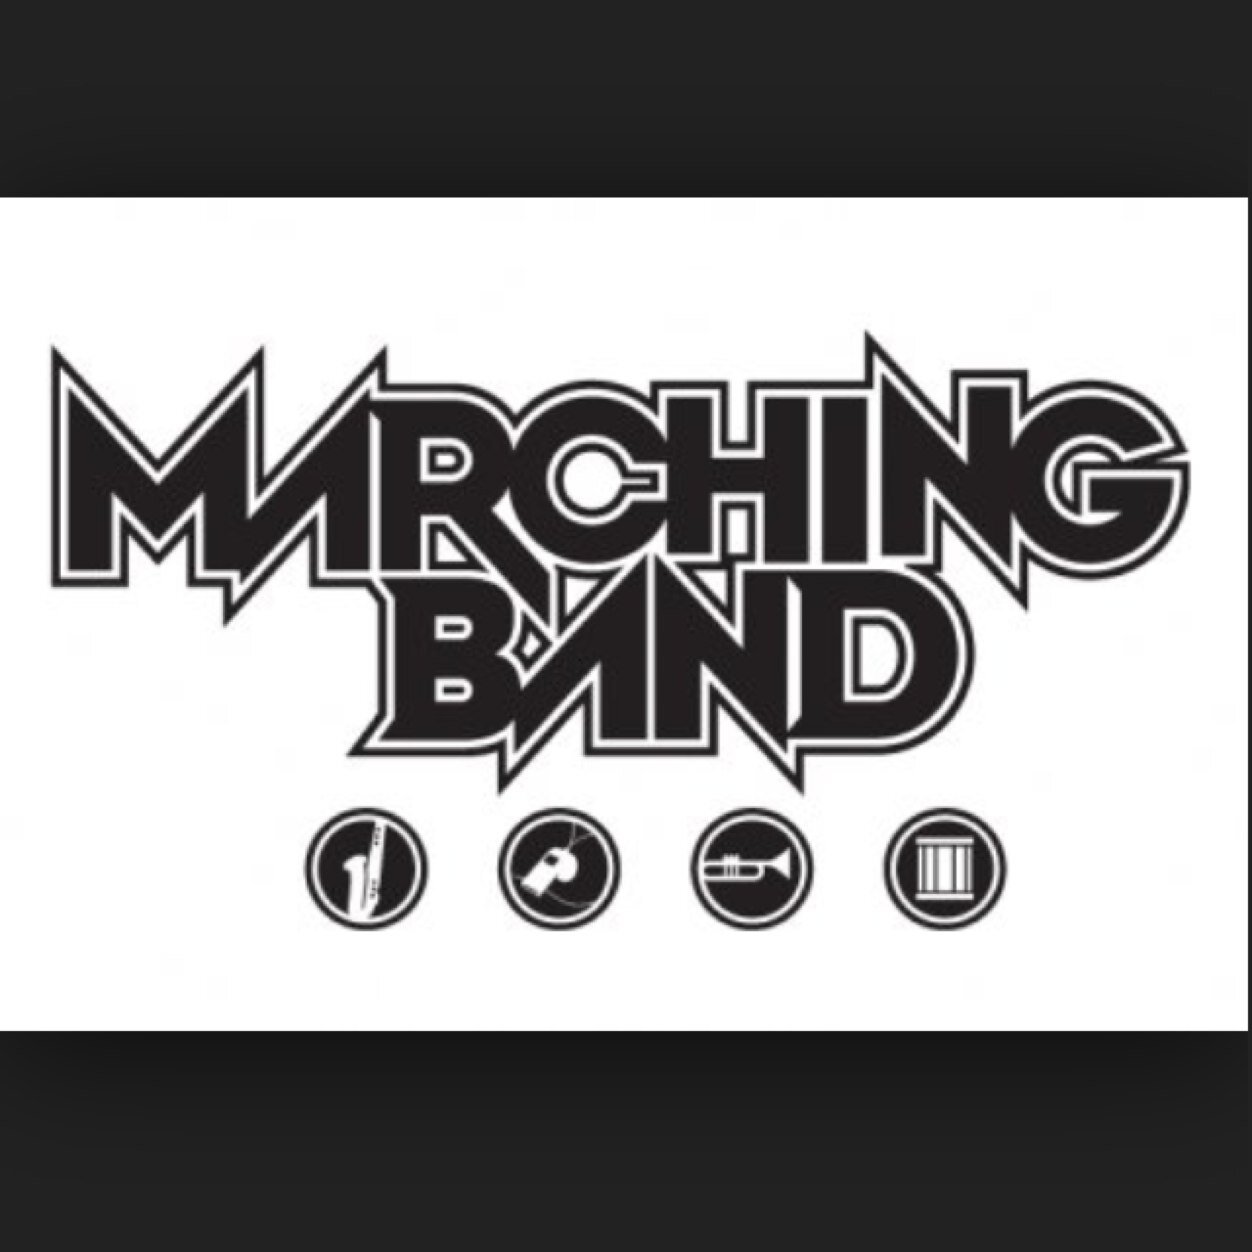 Marching Band Nerd Happy National Marching Band Day Never Stop Doing What You Love